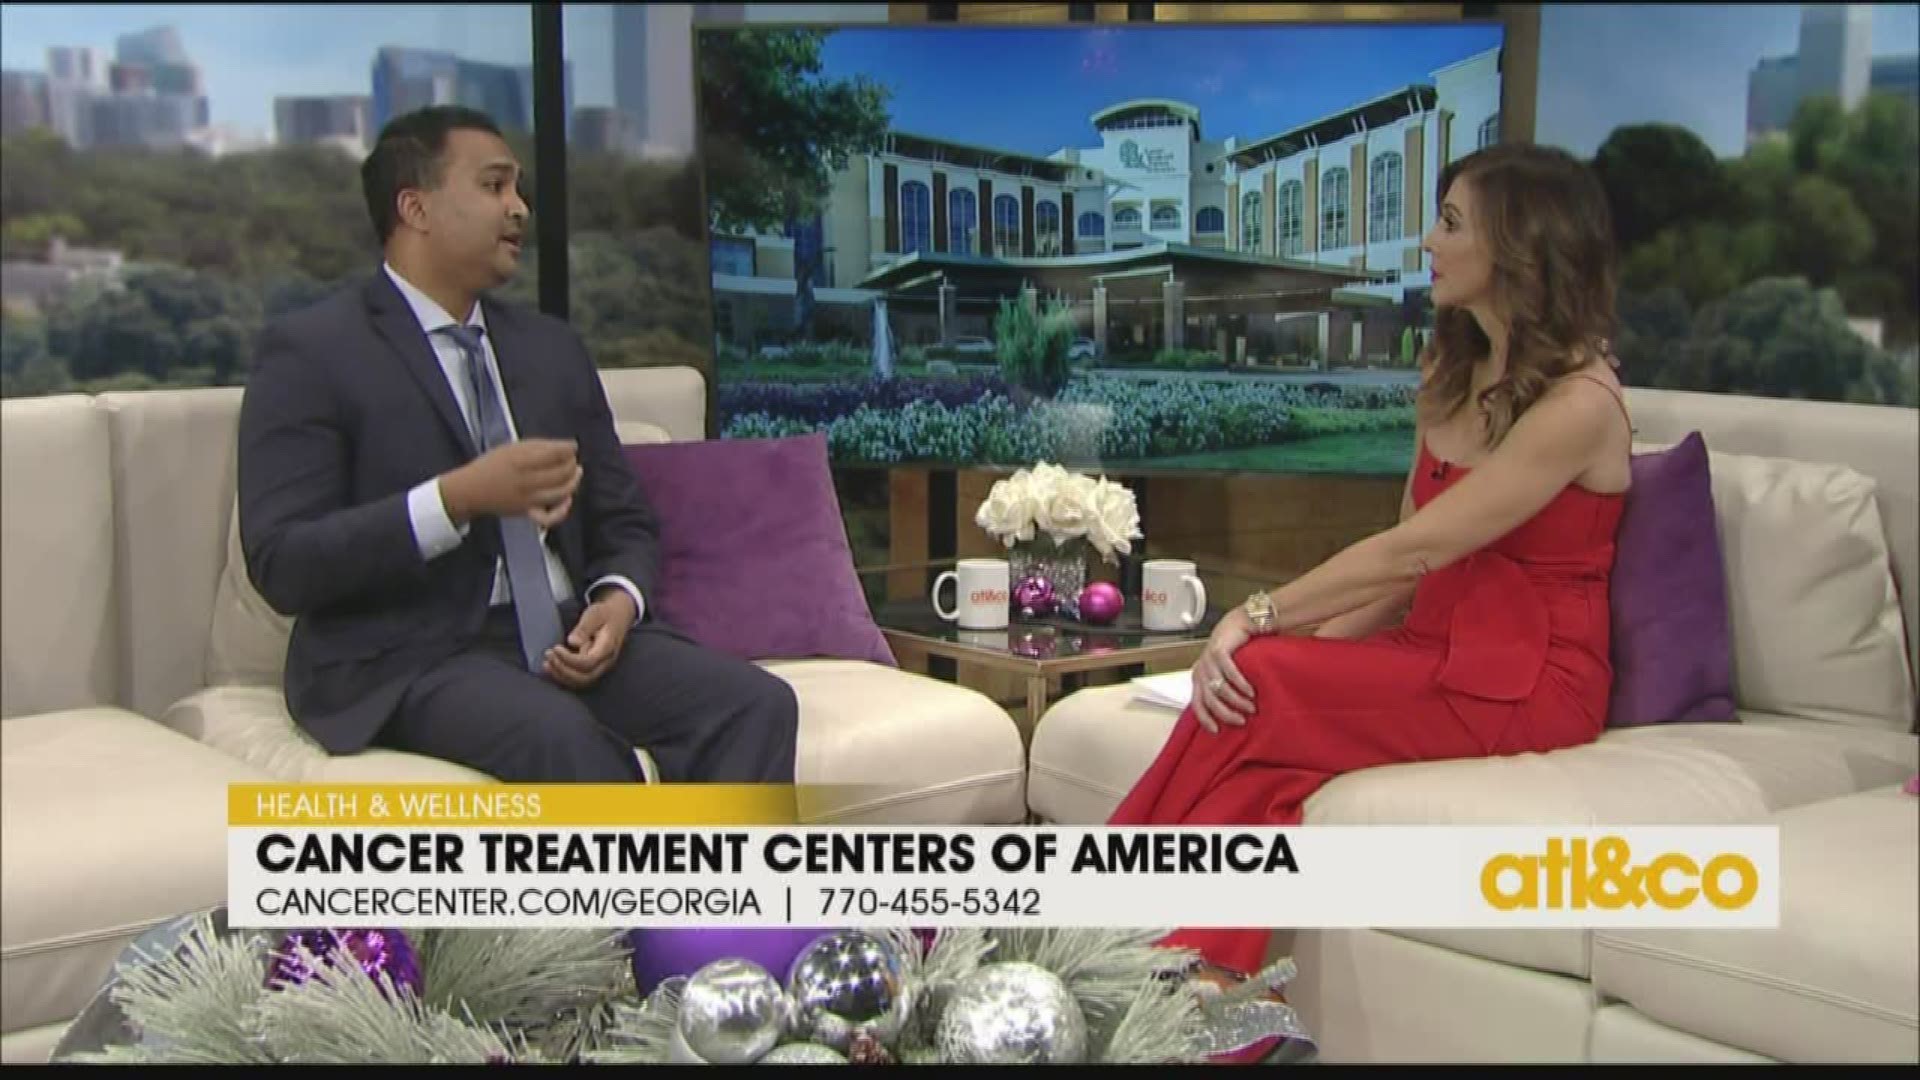 Dr. Damien Hansra from Cancer Treatment Centers of America talks about the obesity epidemic in the U.S. and its link to cancer.